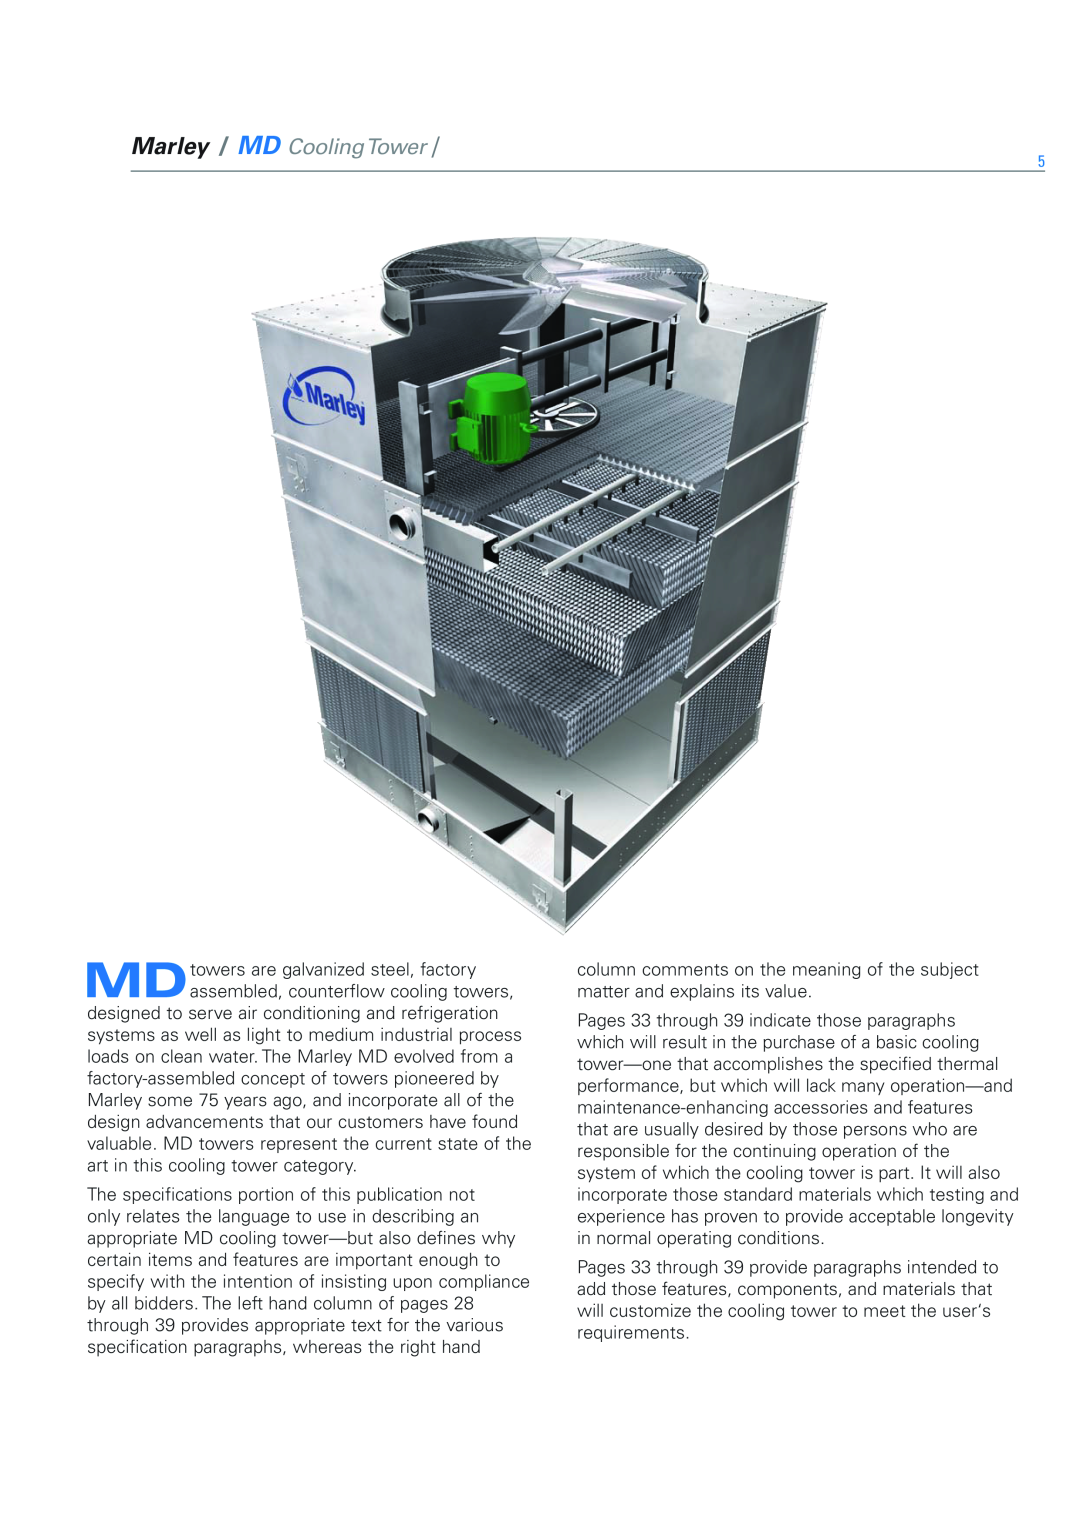 SPX Cooling Technologies Marley MD specifications Marley / MD CoolingTower 